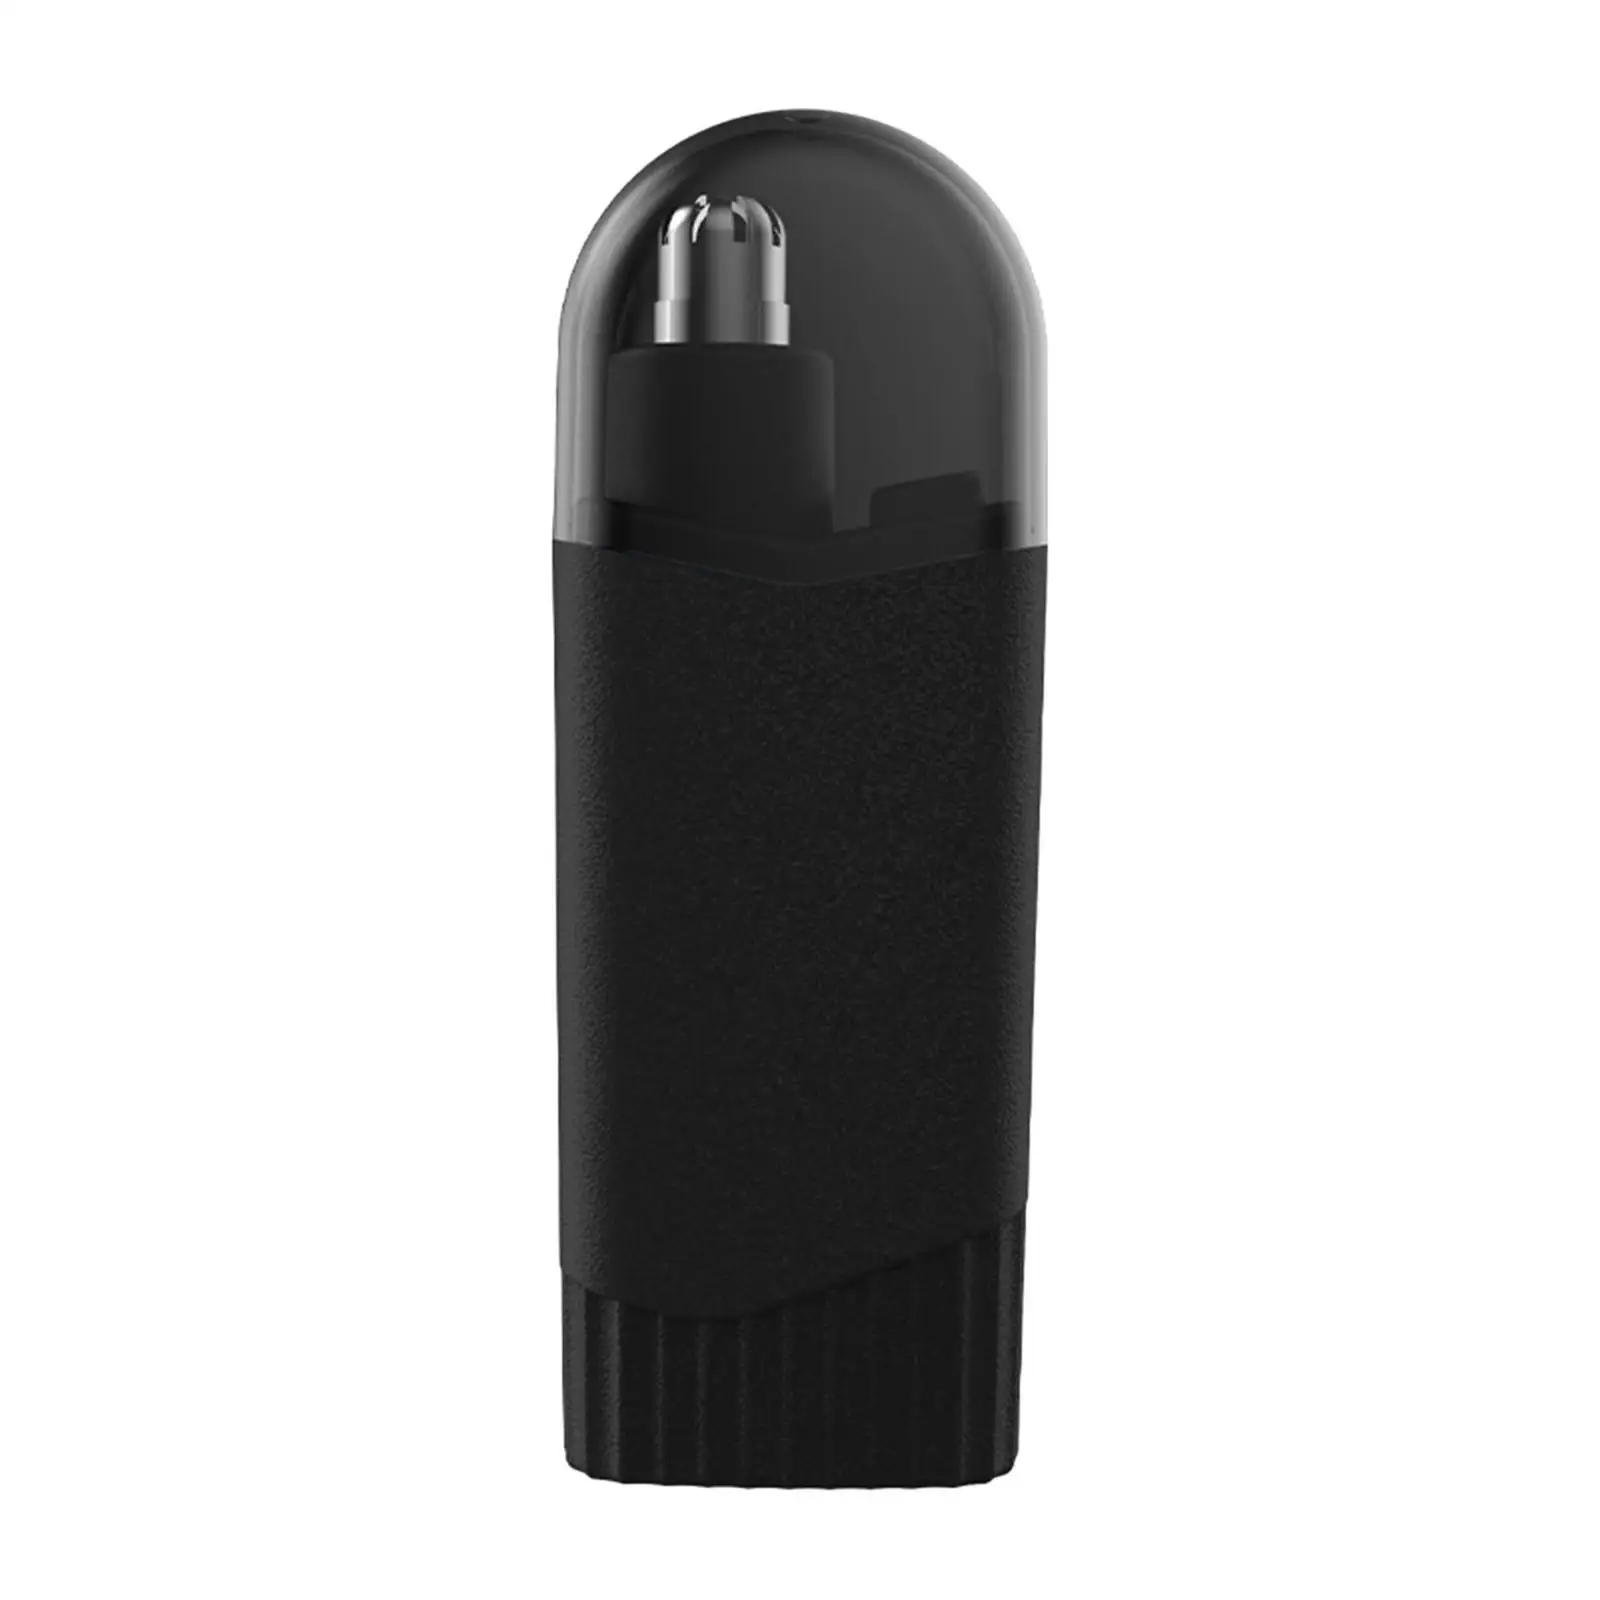 Nose Trimmer Powerful Motor Dustproof Cover Waterproof USB Charging Wet and Dry Nose Shaving Multifunctional Portable